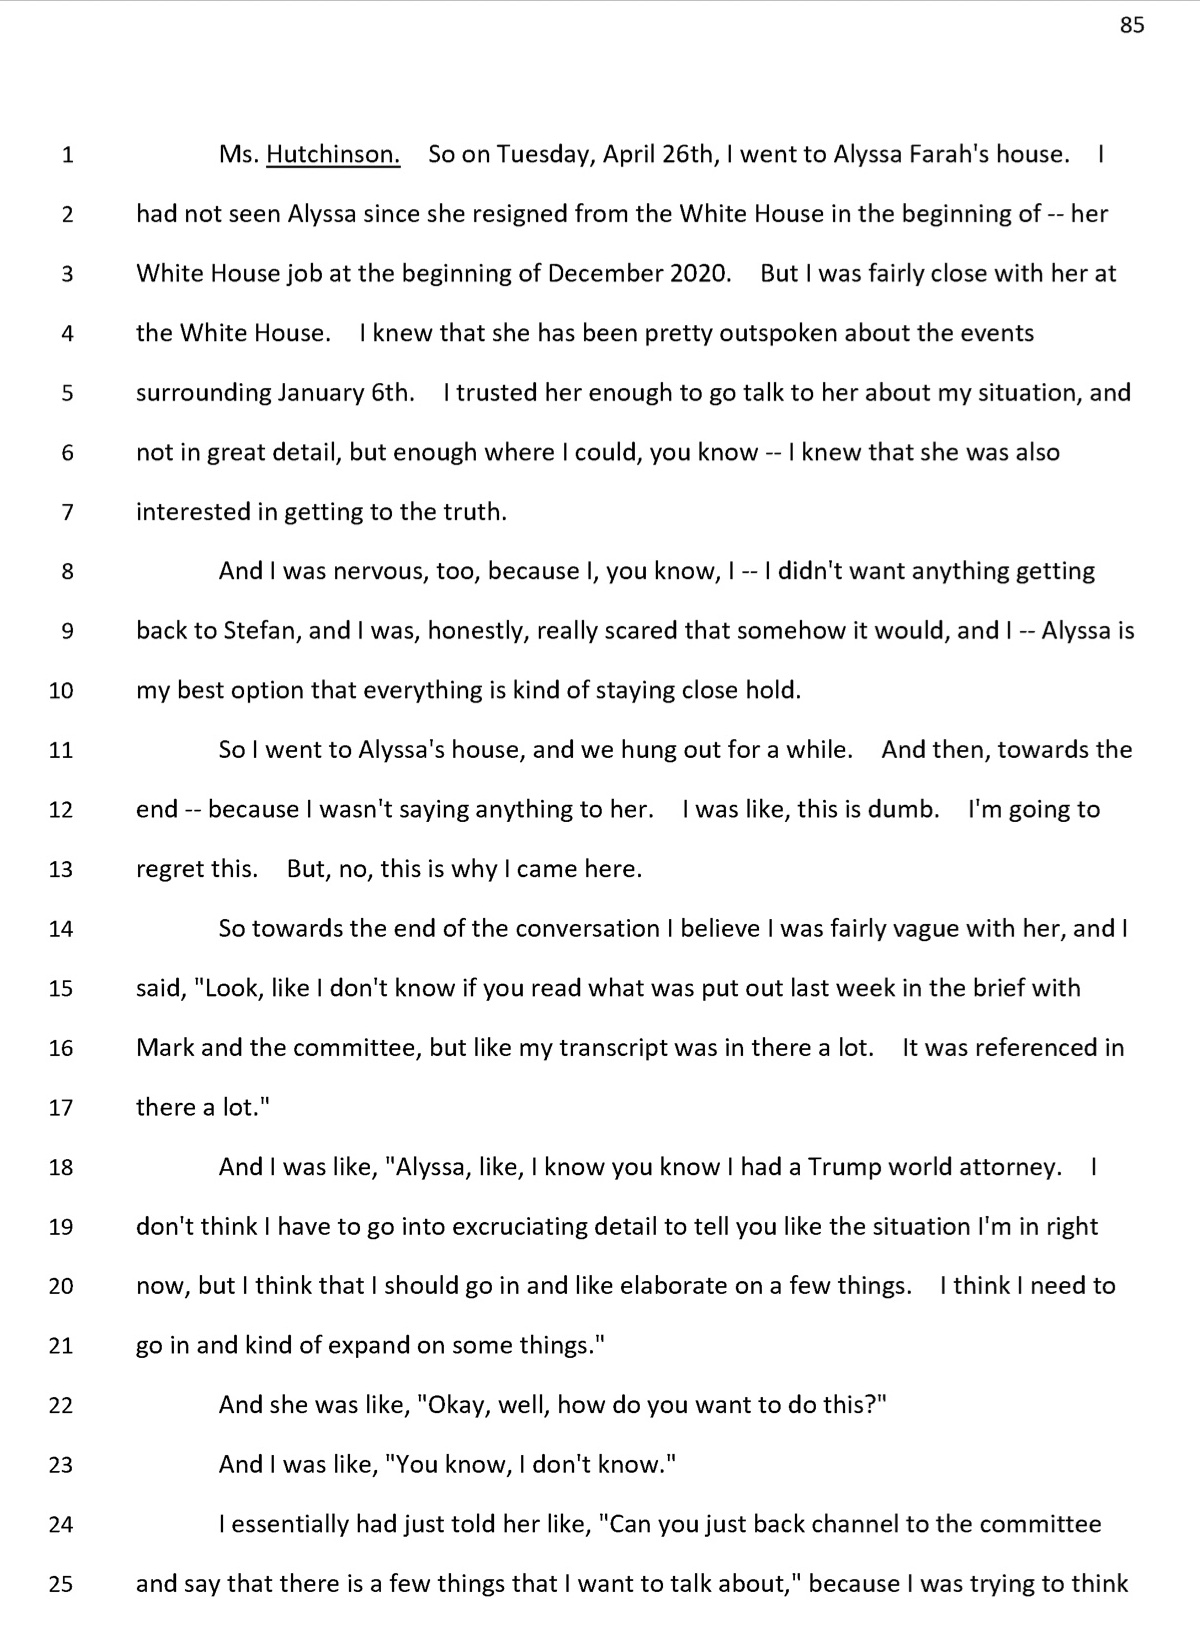 Hutchinson 9/14/2022 deposition page 85